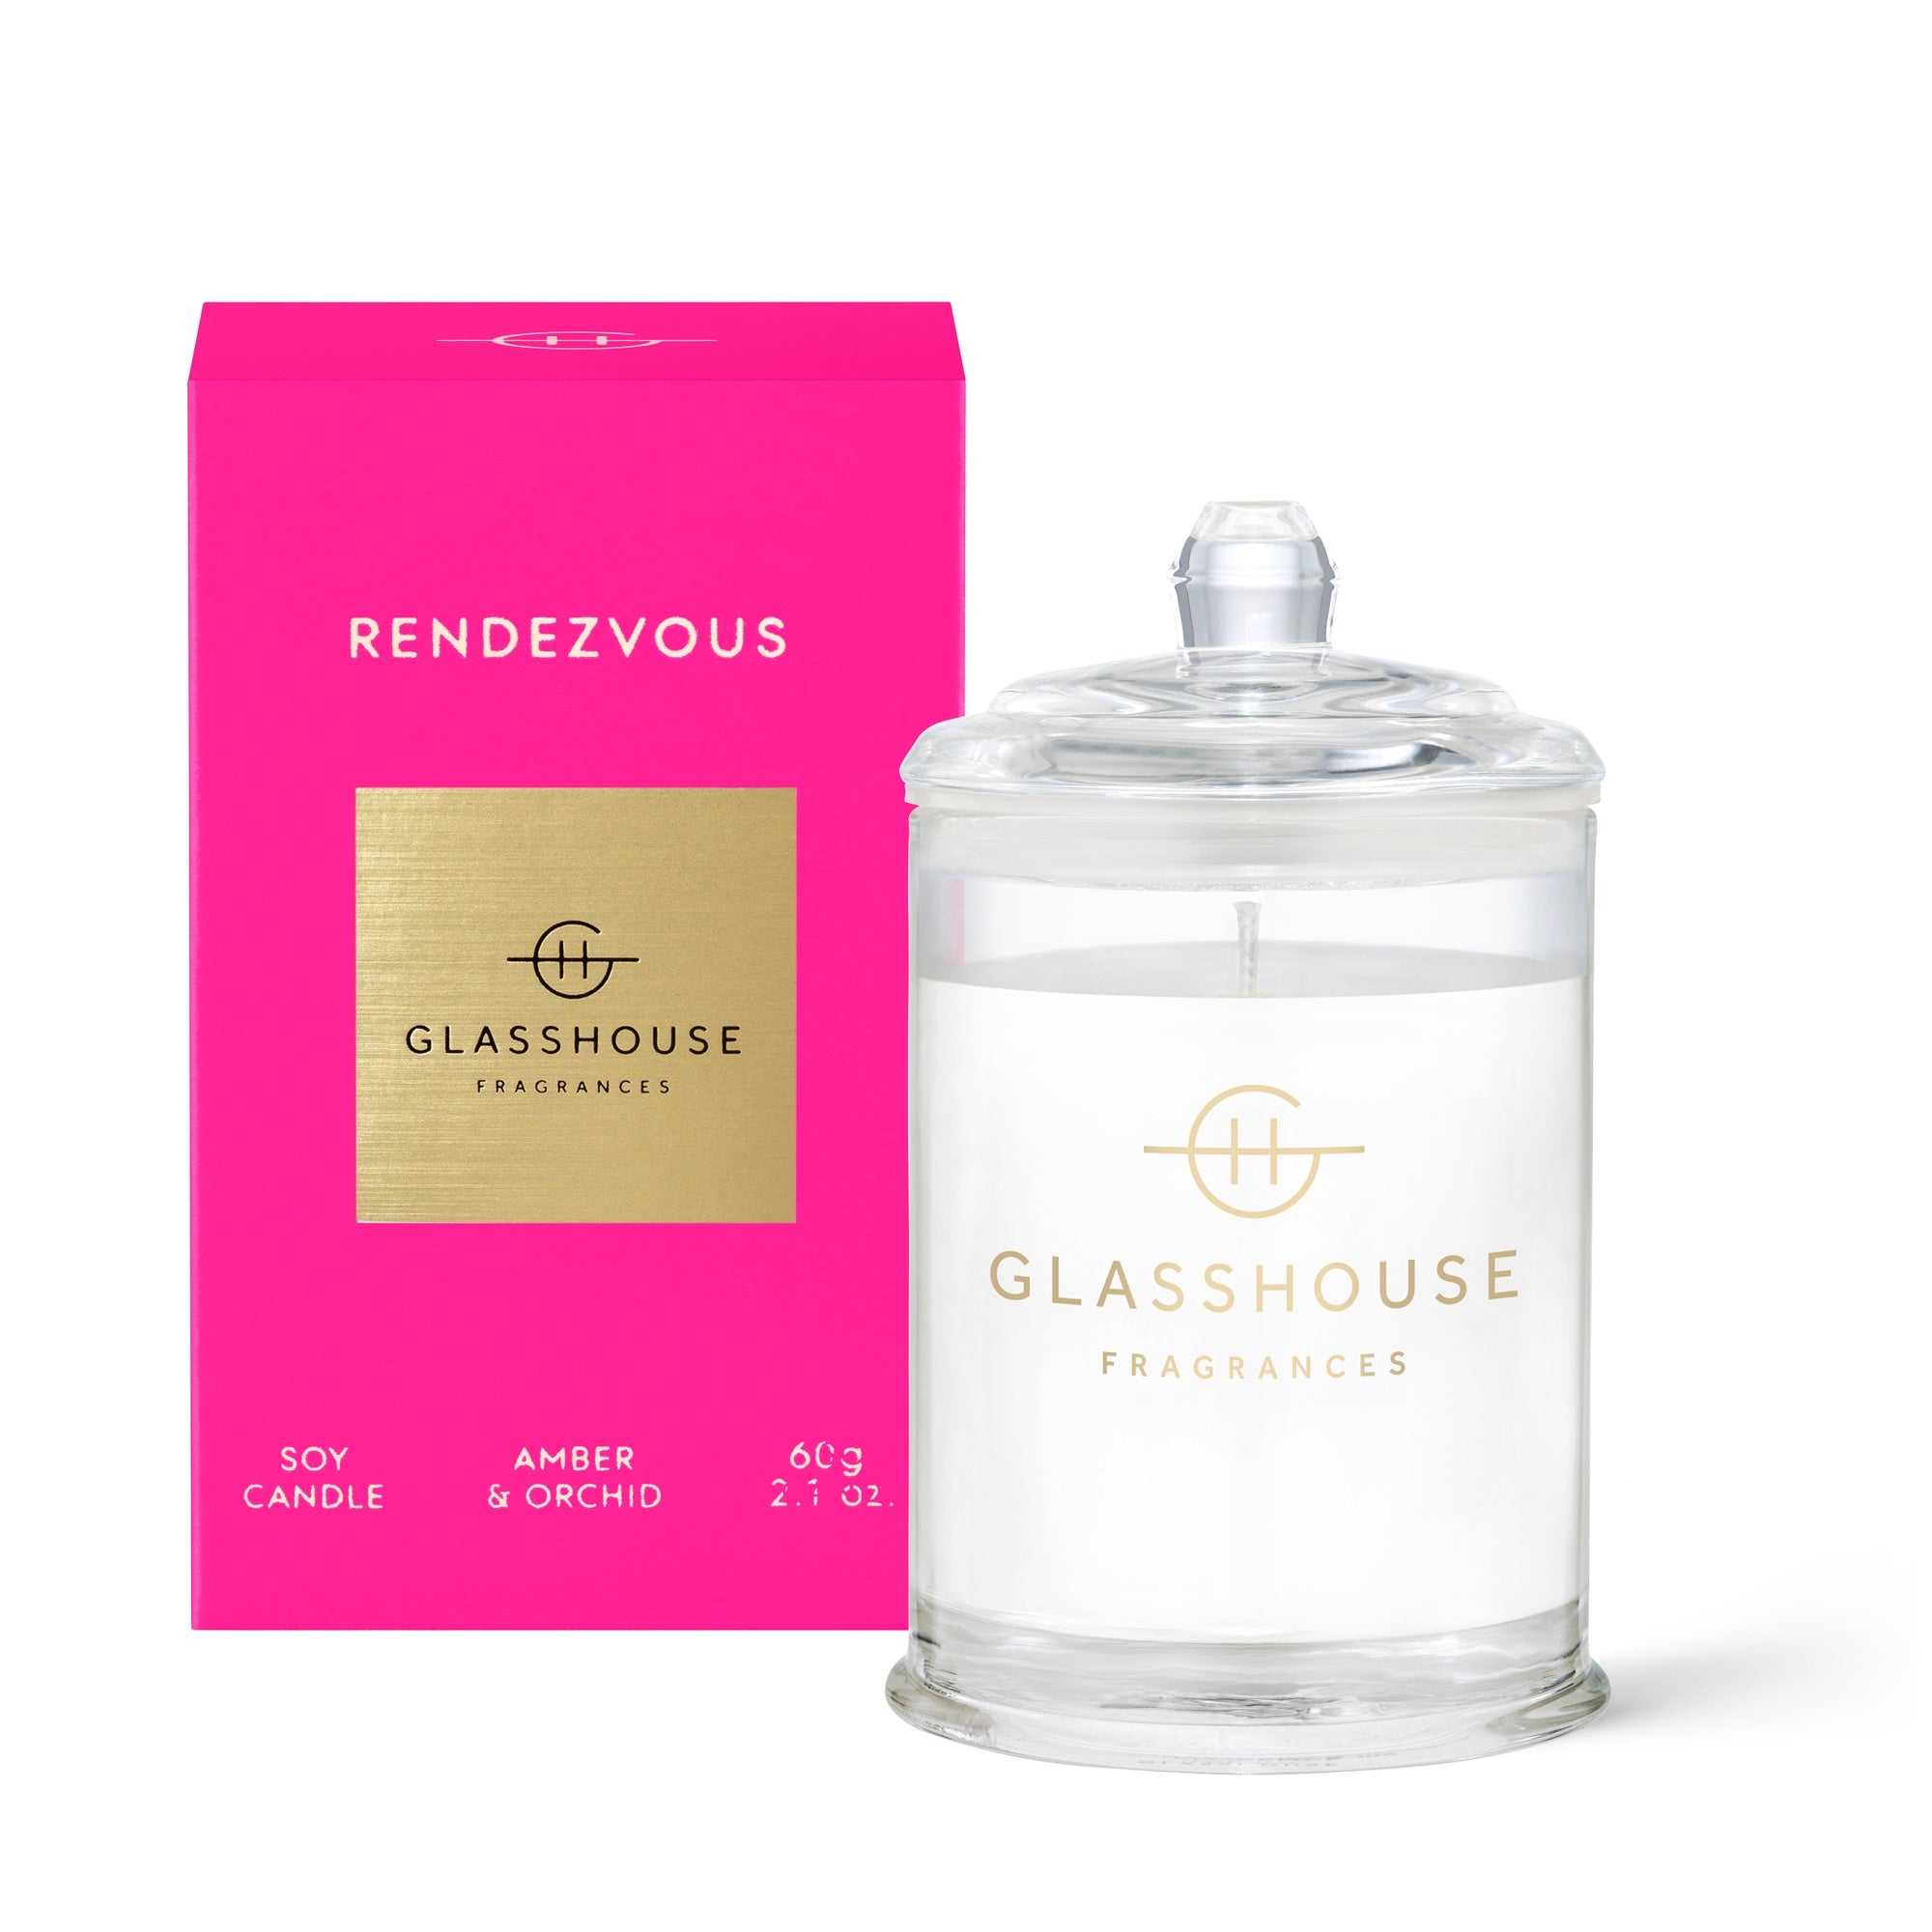 Rendezvous 60g Candle